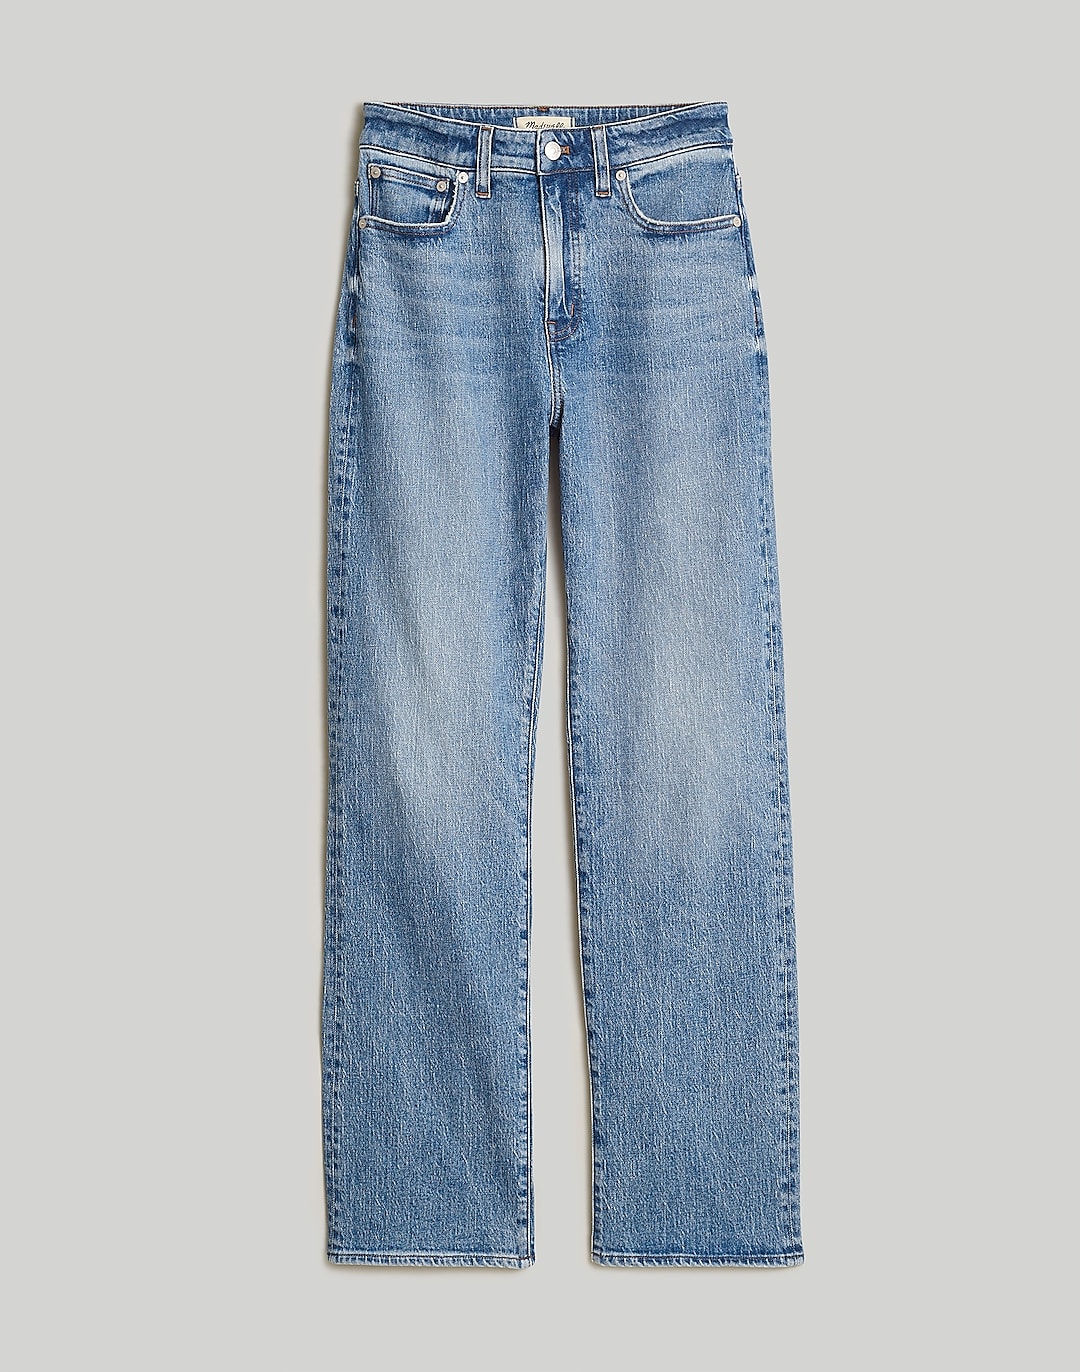 The Plus '90s Straight Jean | Madewell